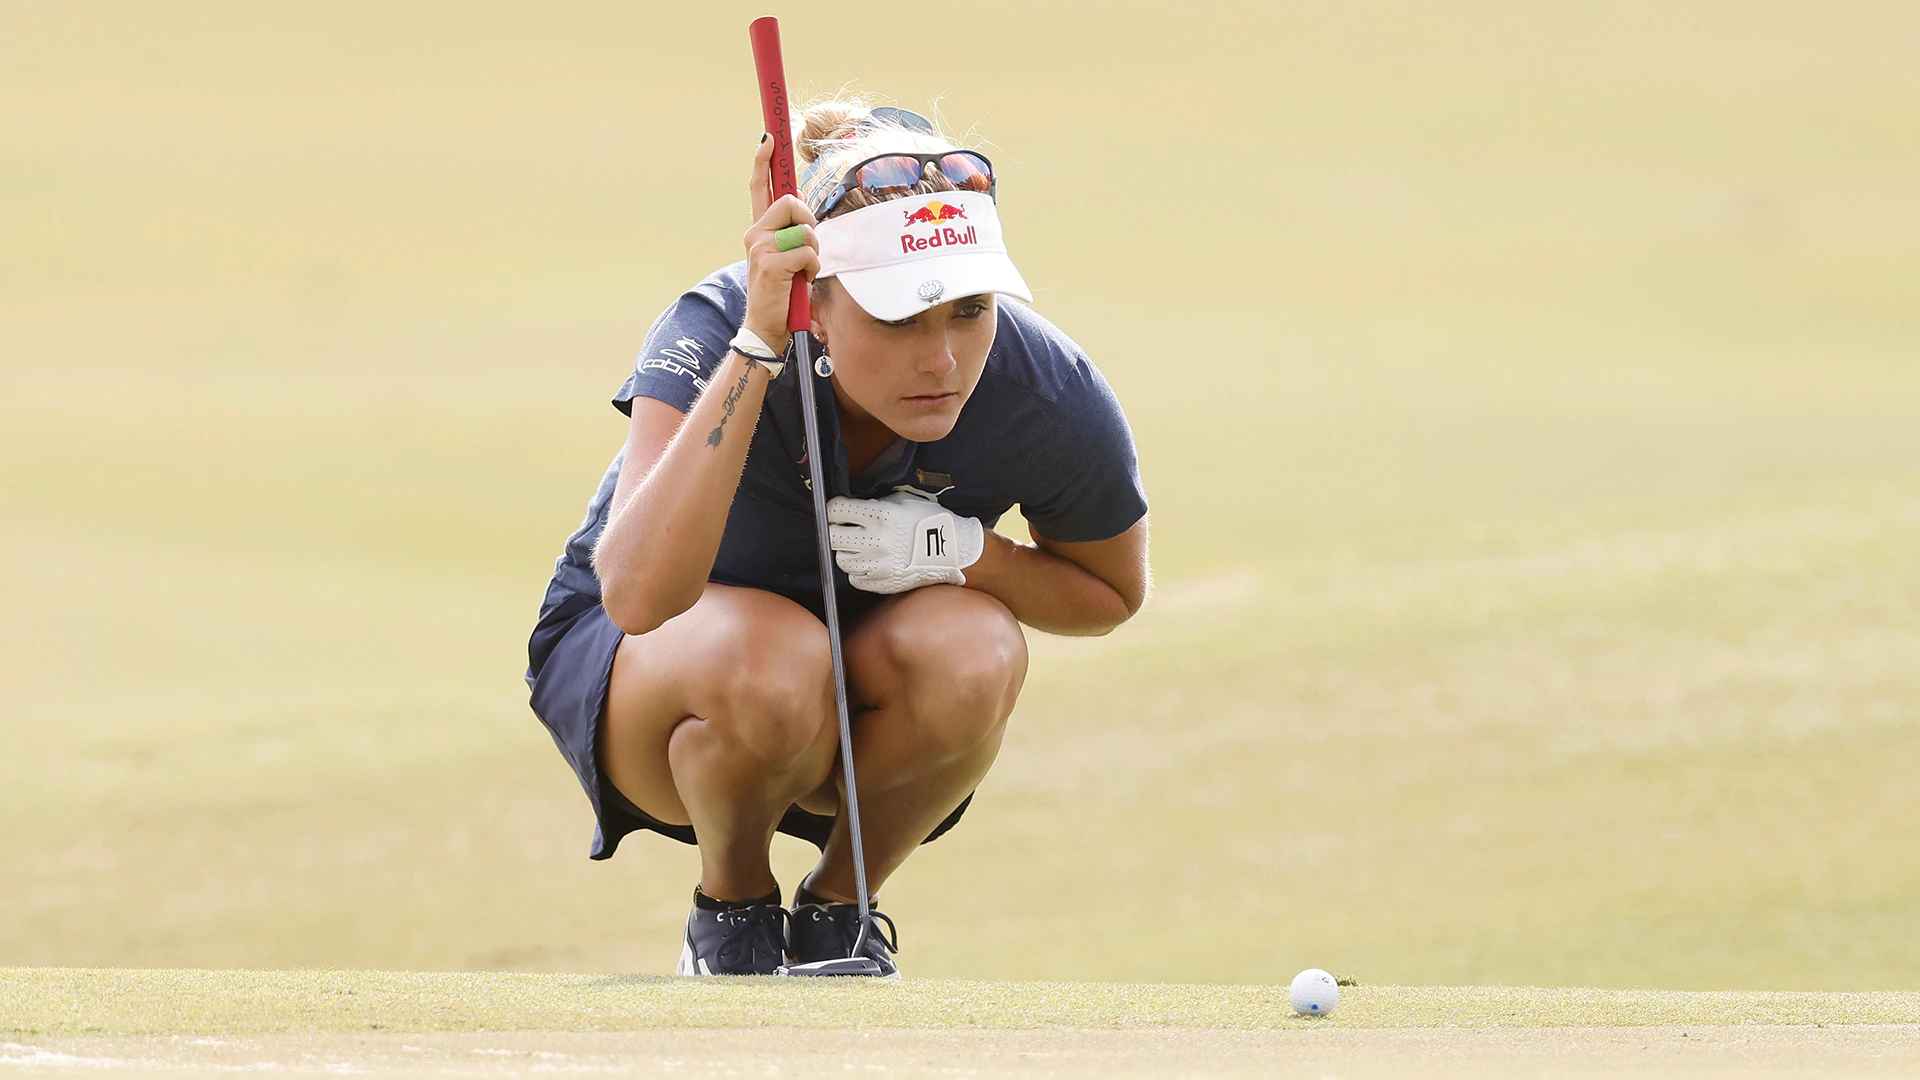 After winless 2020, Lexi Thompson’s 2021 goals likely hinge on her putter